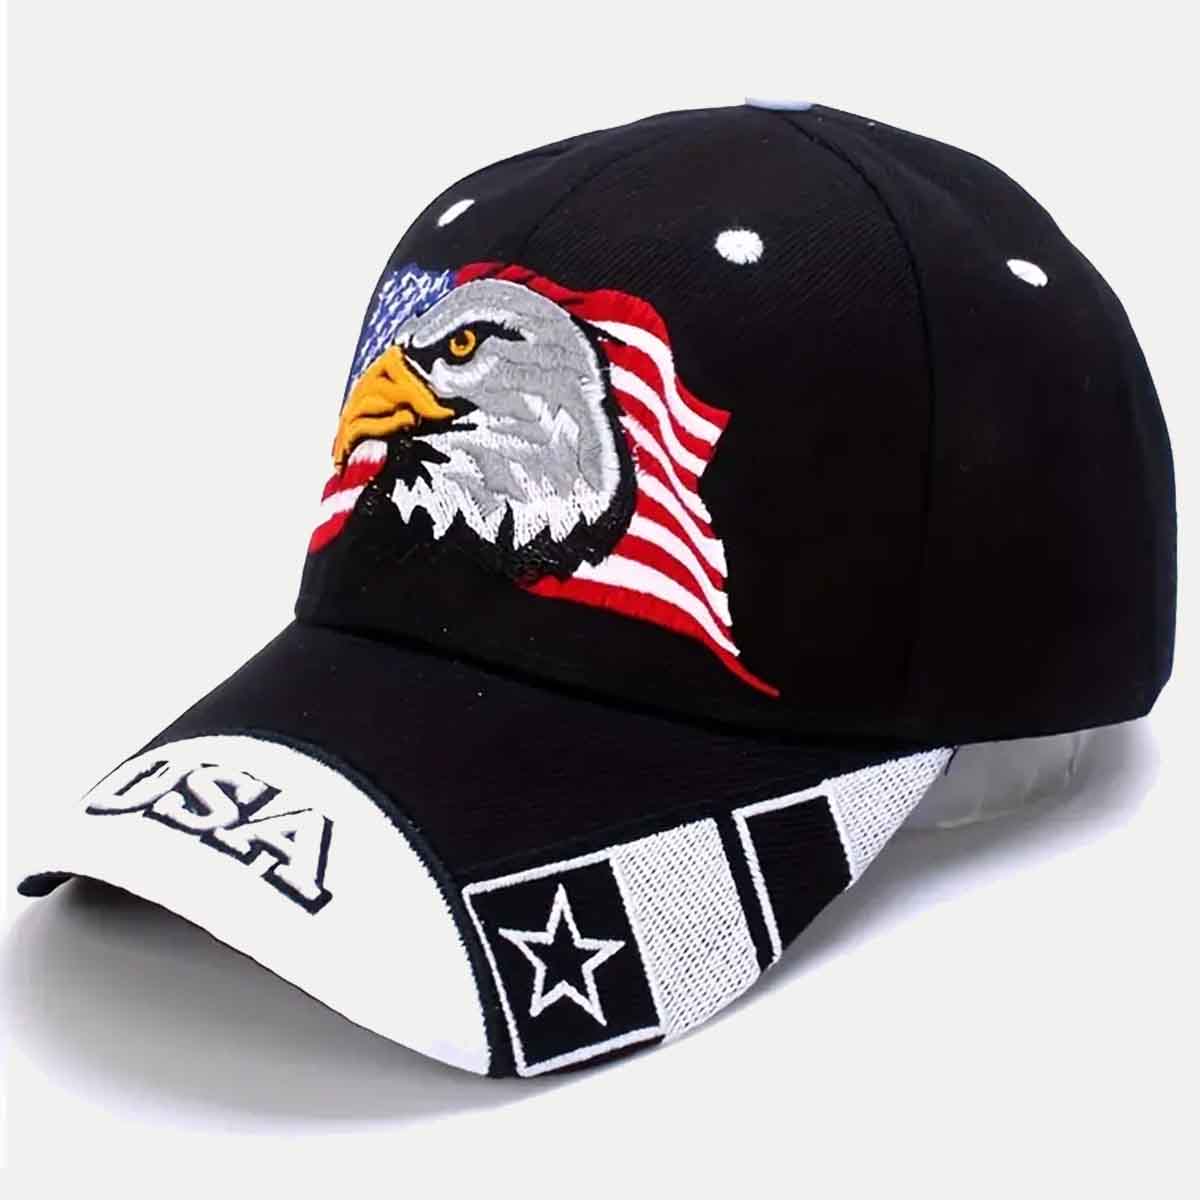 Embroidered USA Eagle Baseball Cap made with breathable material and has an adjustable strap, ensuring a comfortable and secure fit for all head sizes.